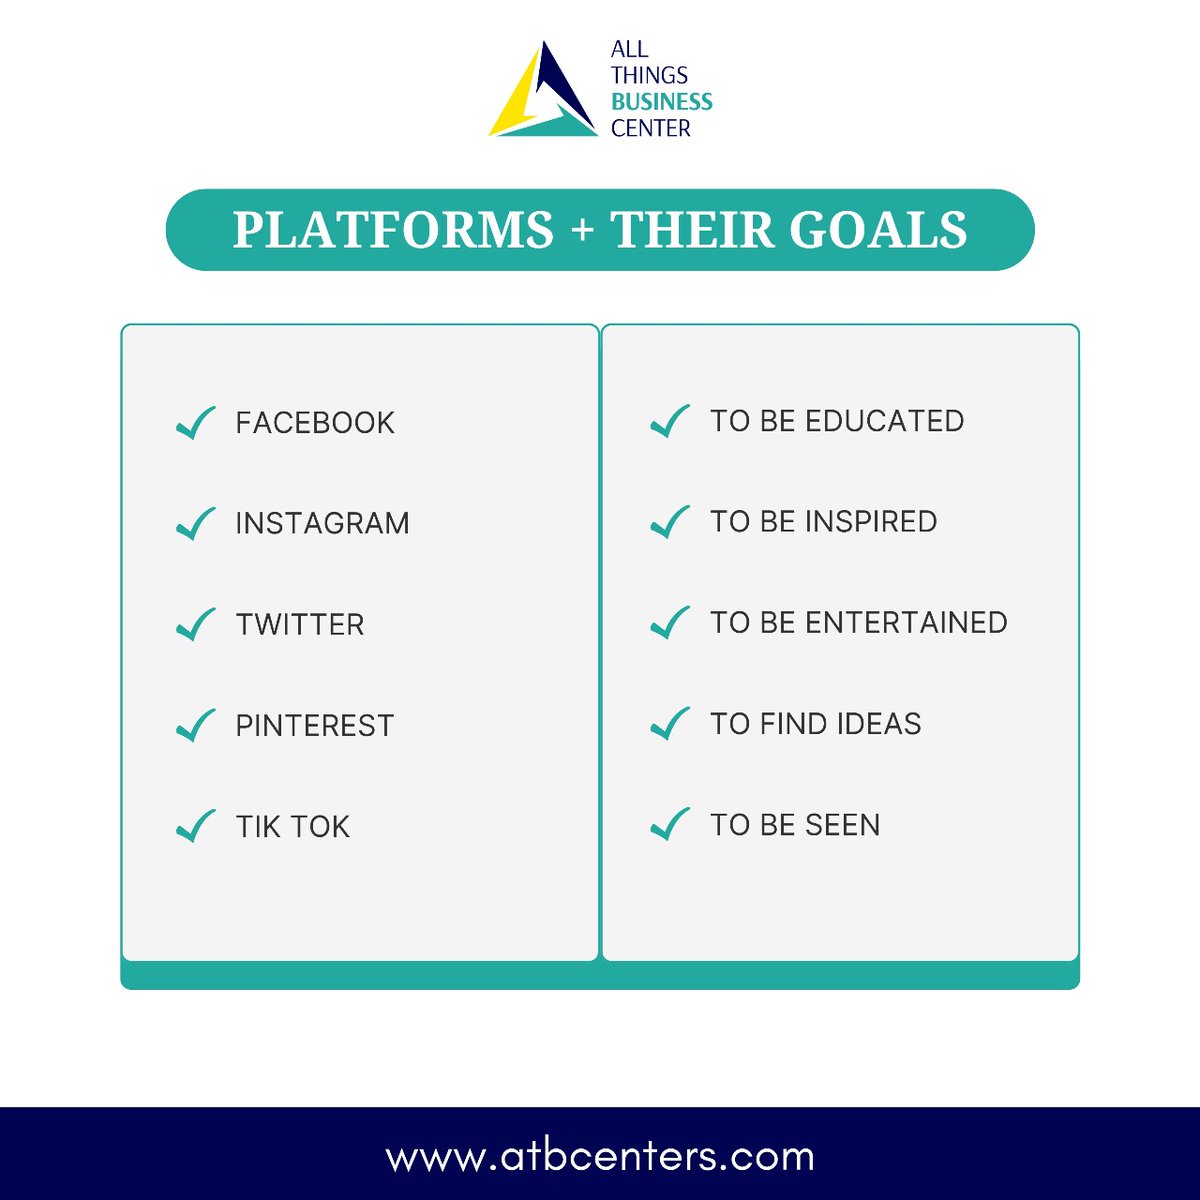 Social Media marketing is a very important part of your overall marketing strategy. 

While there are quite lot of Social Media platforms to choose from it is easy to get worried. 
.
Contact us for more info! atbcenters.com
.
#socialmediamanagement #digitalstrategy